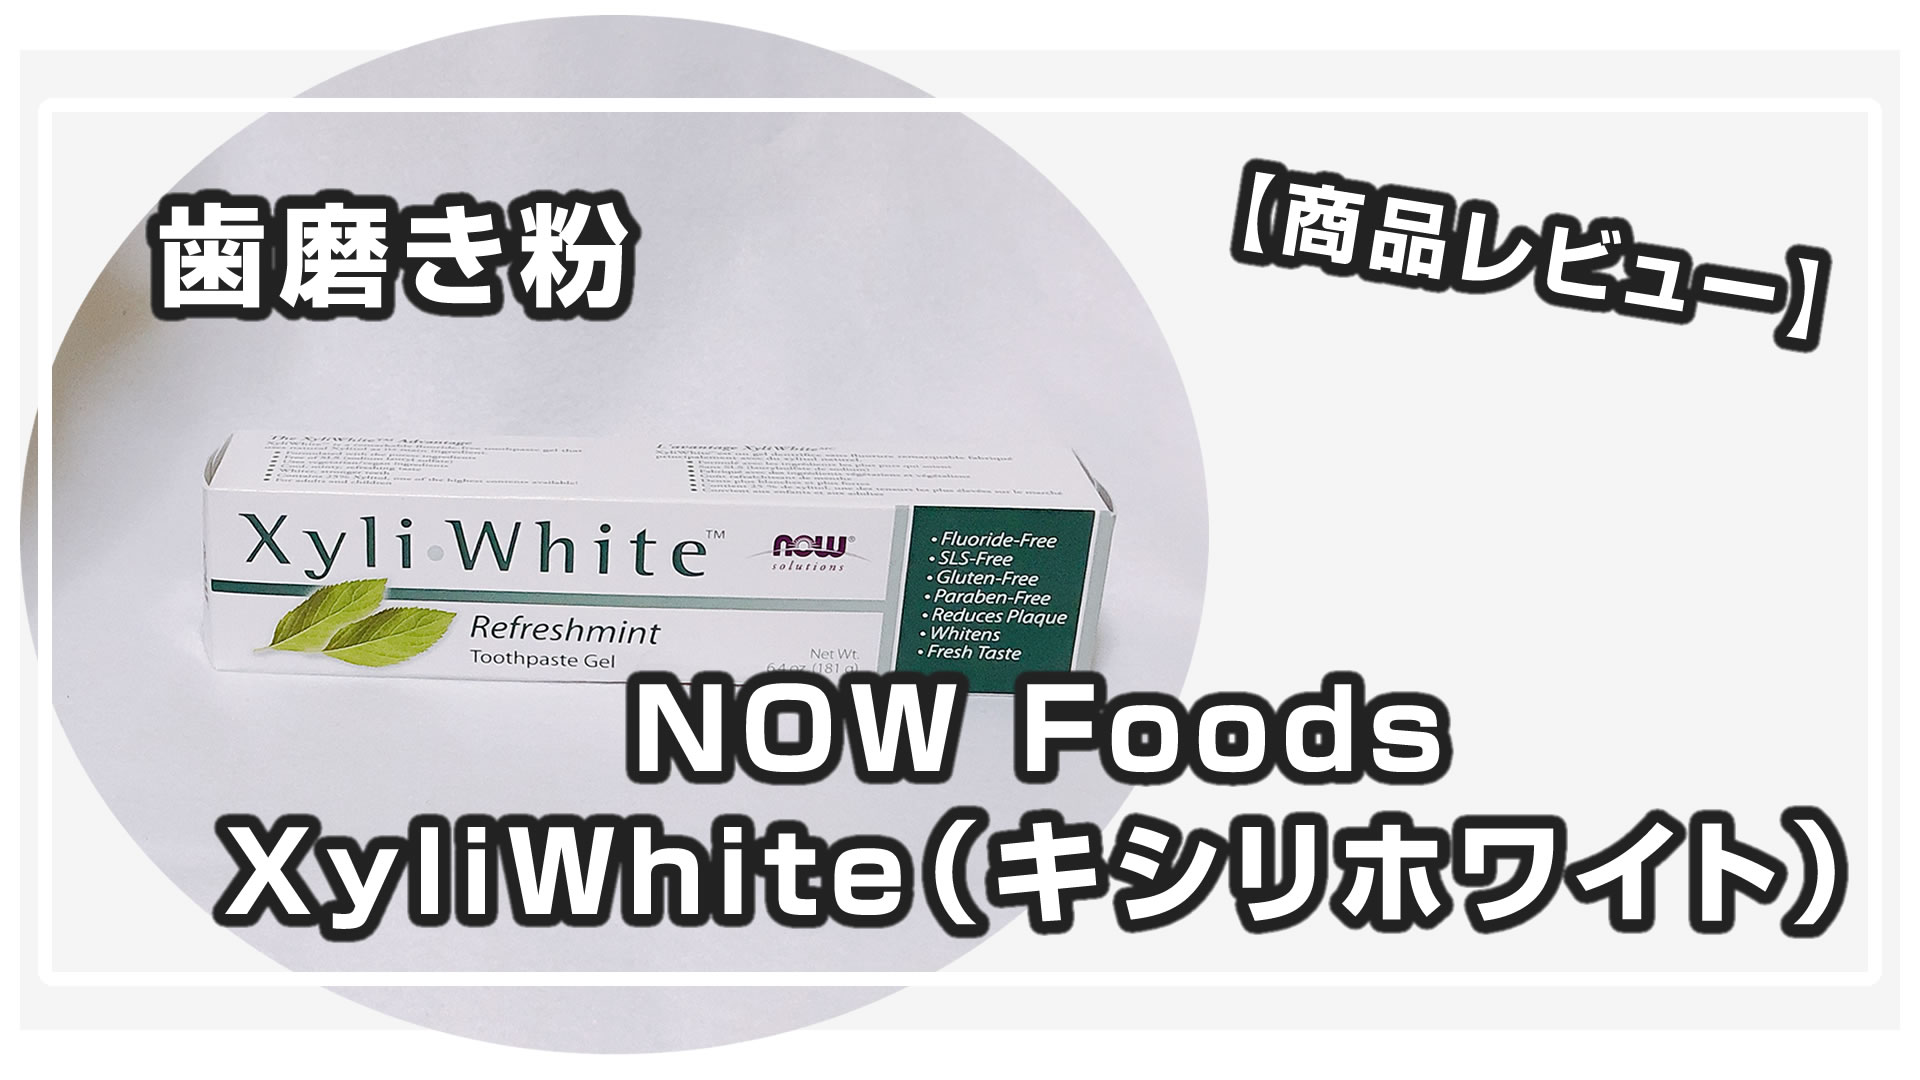 Now Foods ナウフーズ　XyliWhiteキシリホワイト 2本セット！！